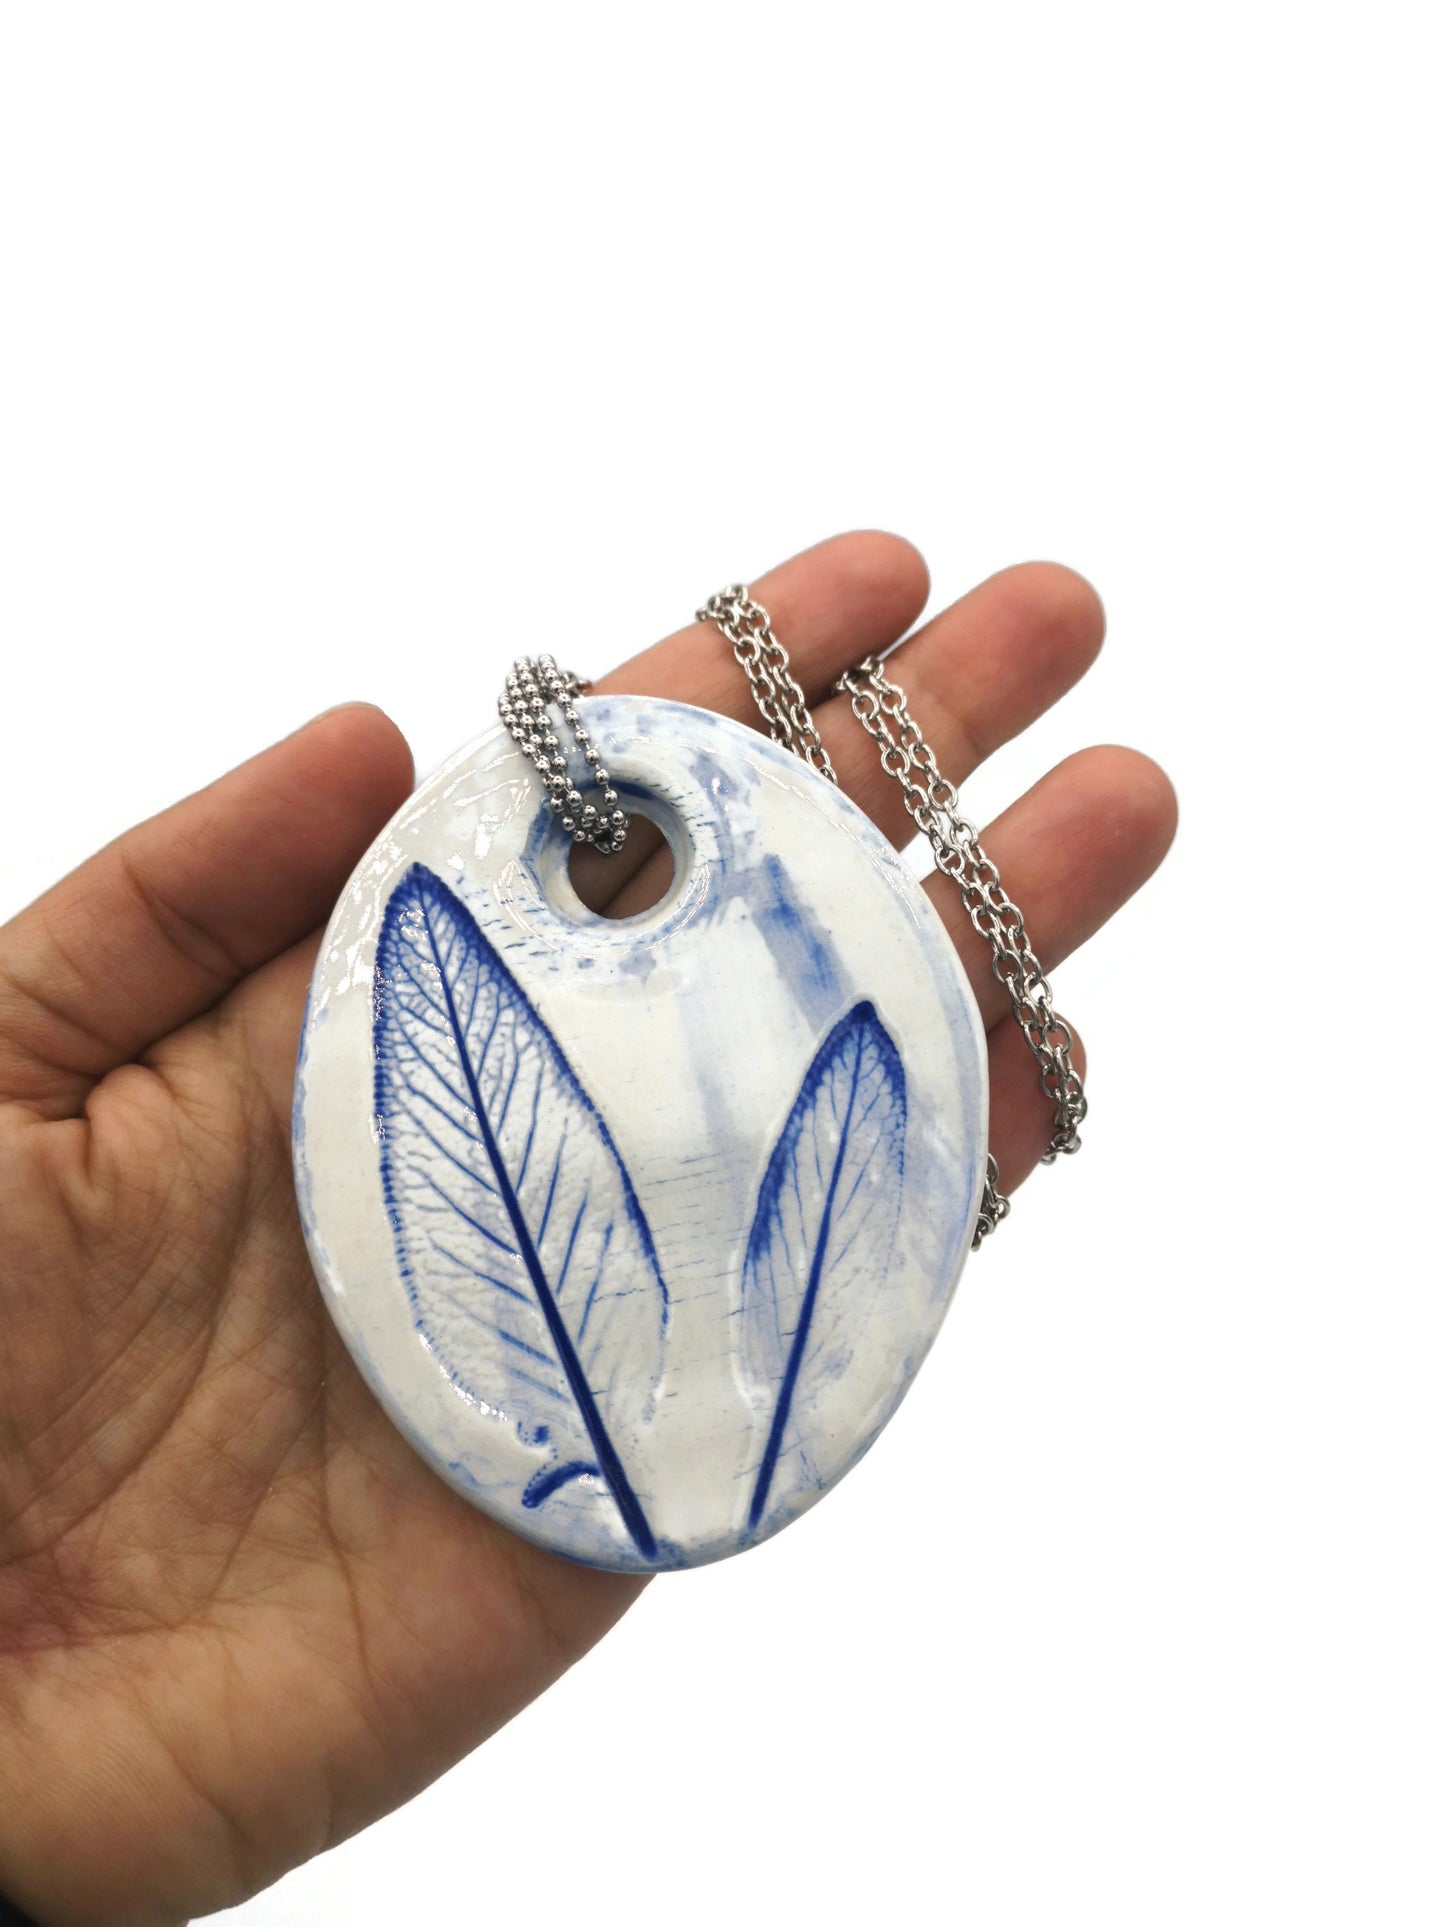 Extra Large Blue Statement Necklace Pendant For Women, Aesthetic Plant Lover Gift For Mothers Day, Boho Best Gifts For Her, Handmade Jewelry - Ceramica Ana Rafael